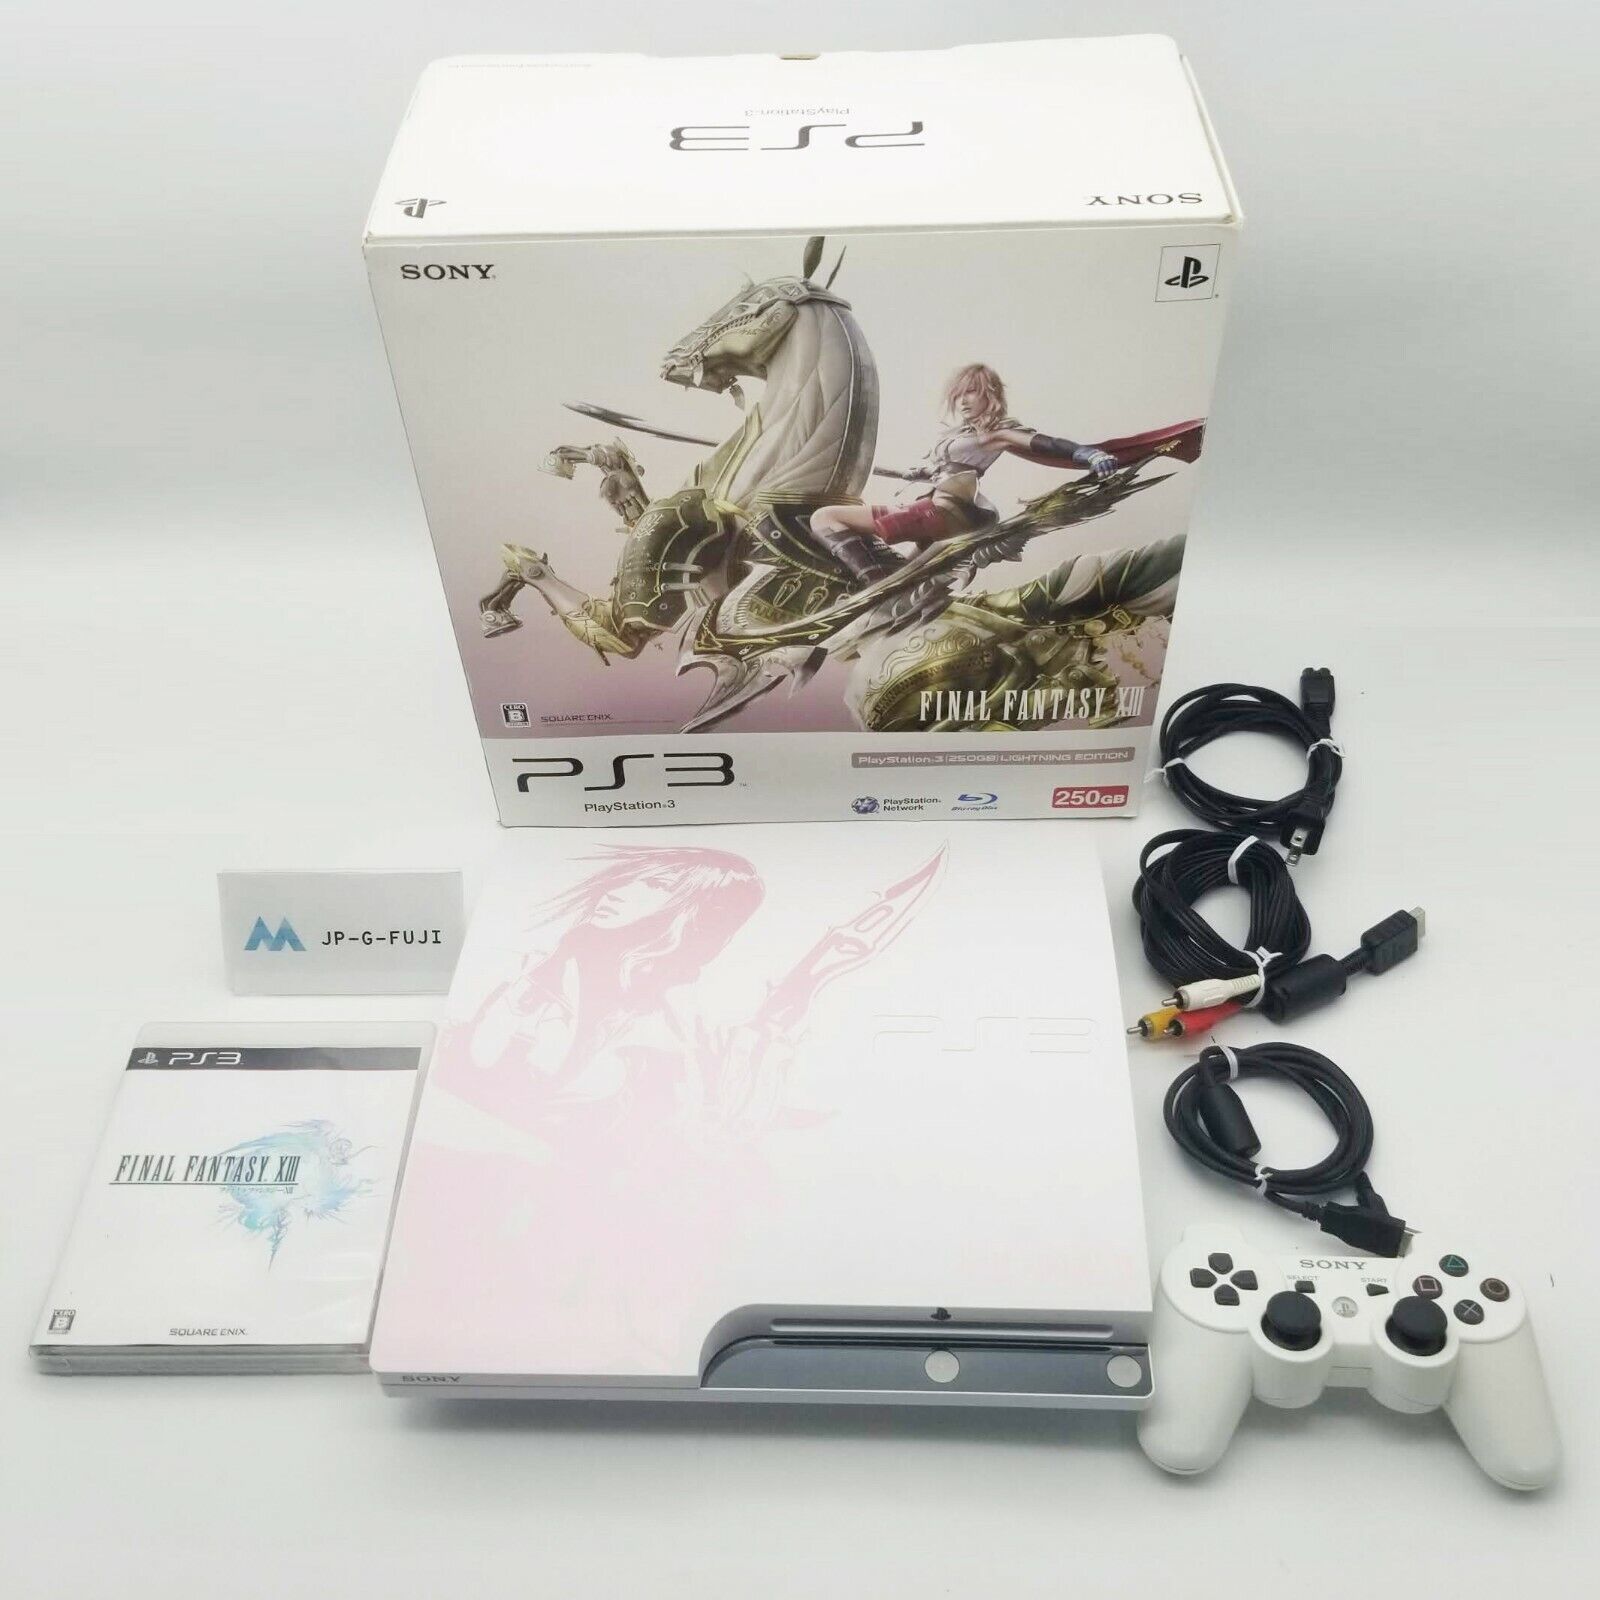 PlayStation 3 FINAL FANTASY XIII 13 LIGHTNING EDITION PS3 Console from Japan